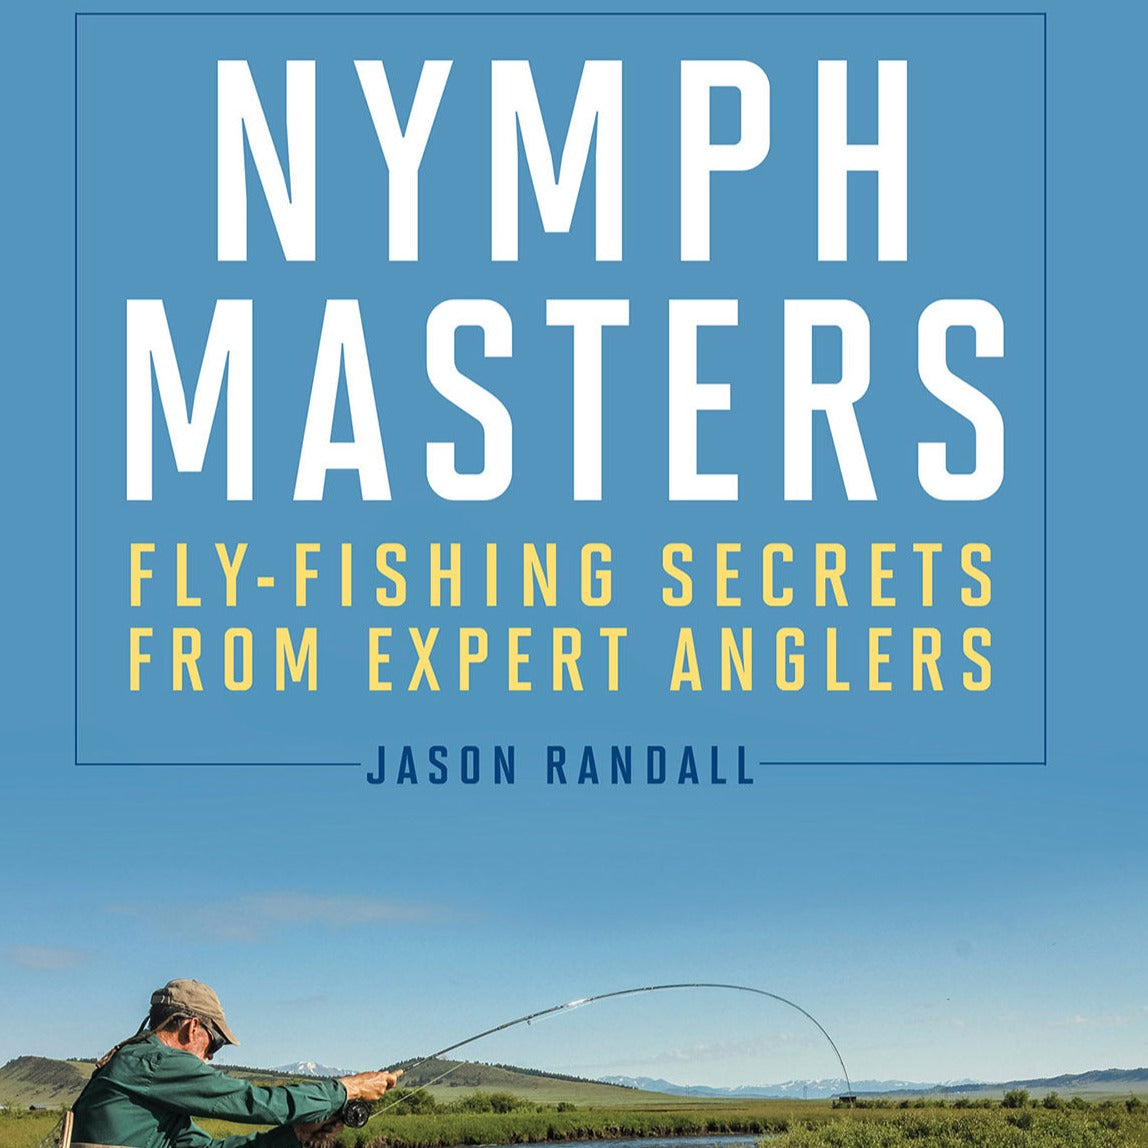 Nymph Masters: Fly-Fishing Secrets from Expert Anglers by Jason